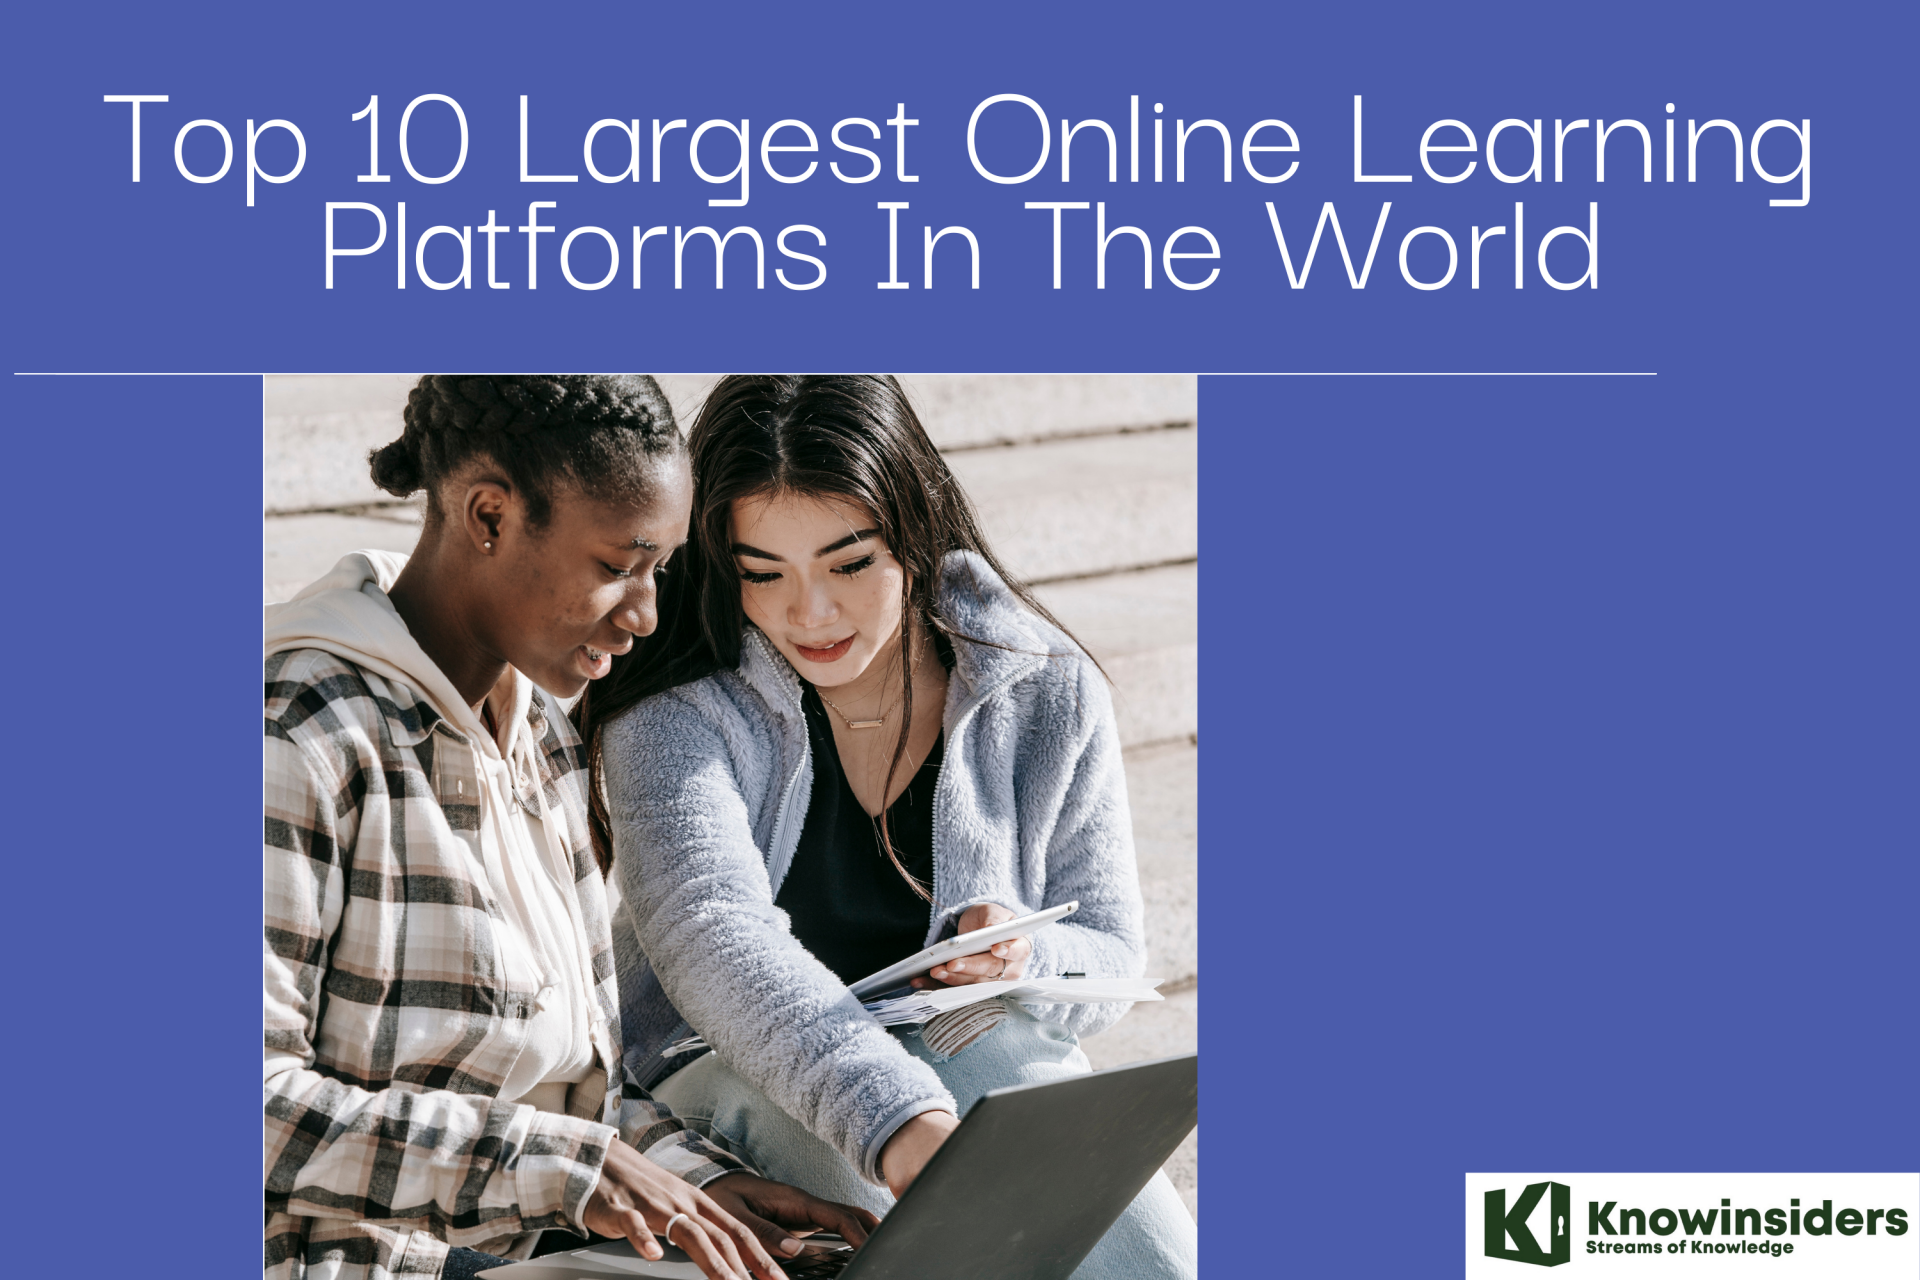 Top 10 Largest Platforms for Online Learning Around The World